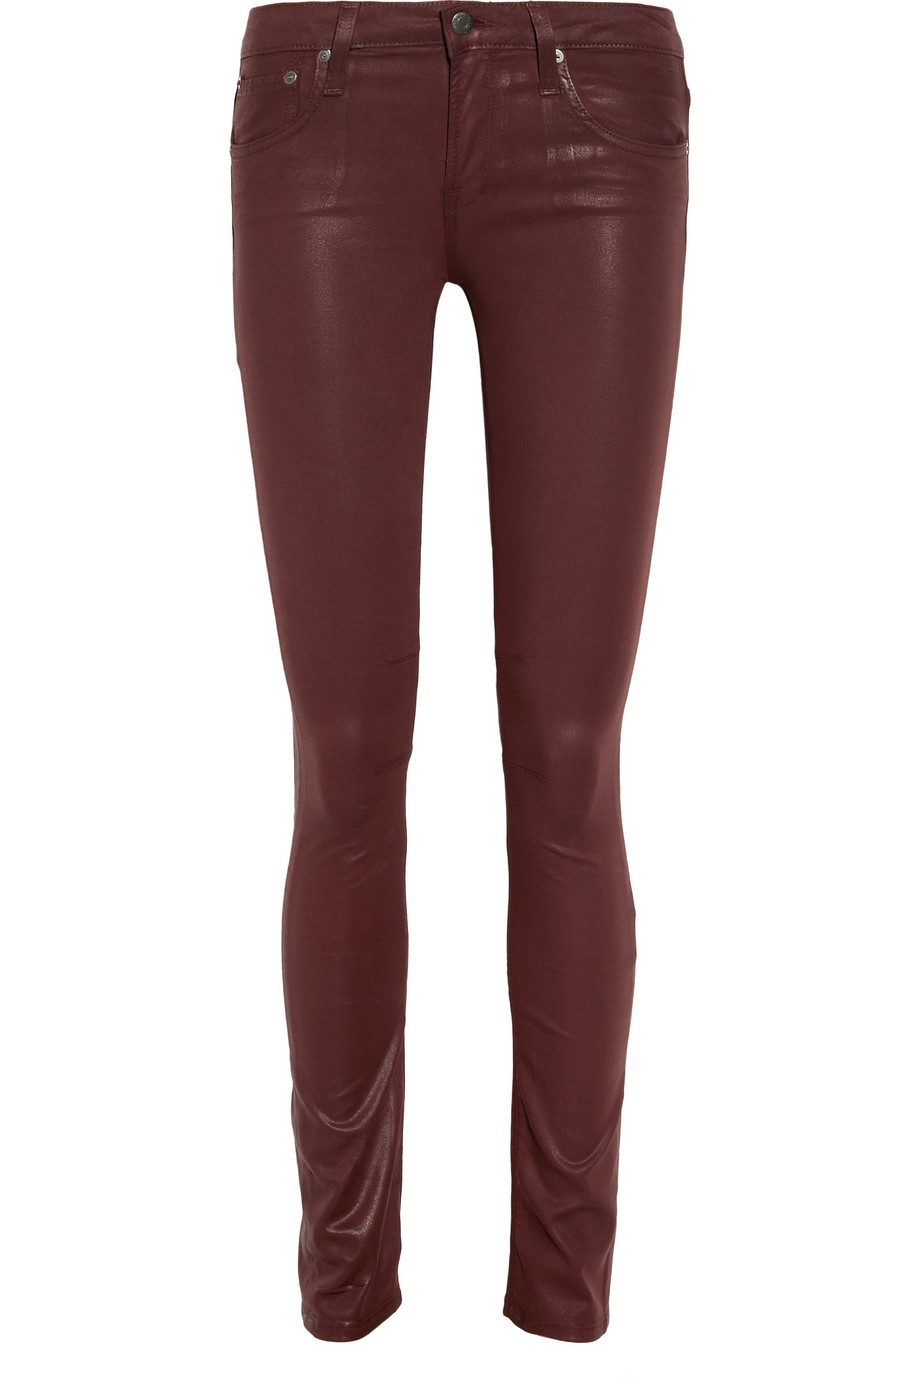 Lyst - Helmut Lang Coated Midrise Skinny Jeans in Purple